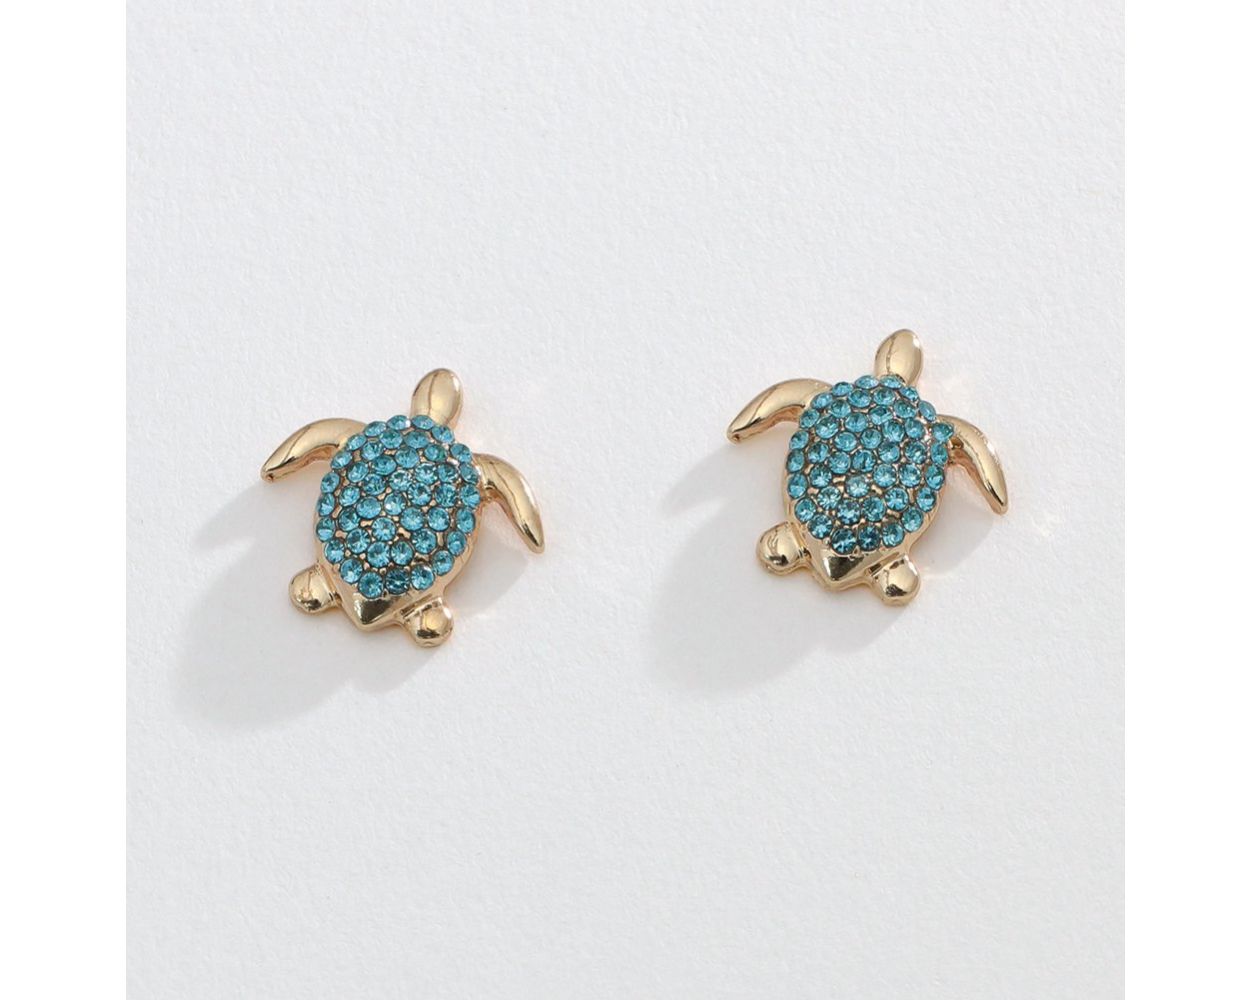 Turtles with Aqua Crystals - Earrings - Mellow Monkey